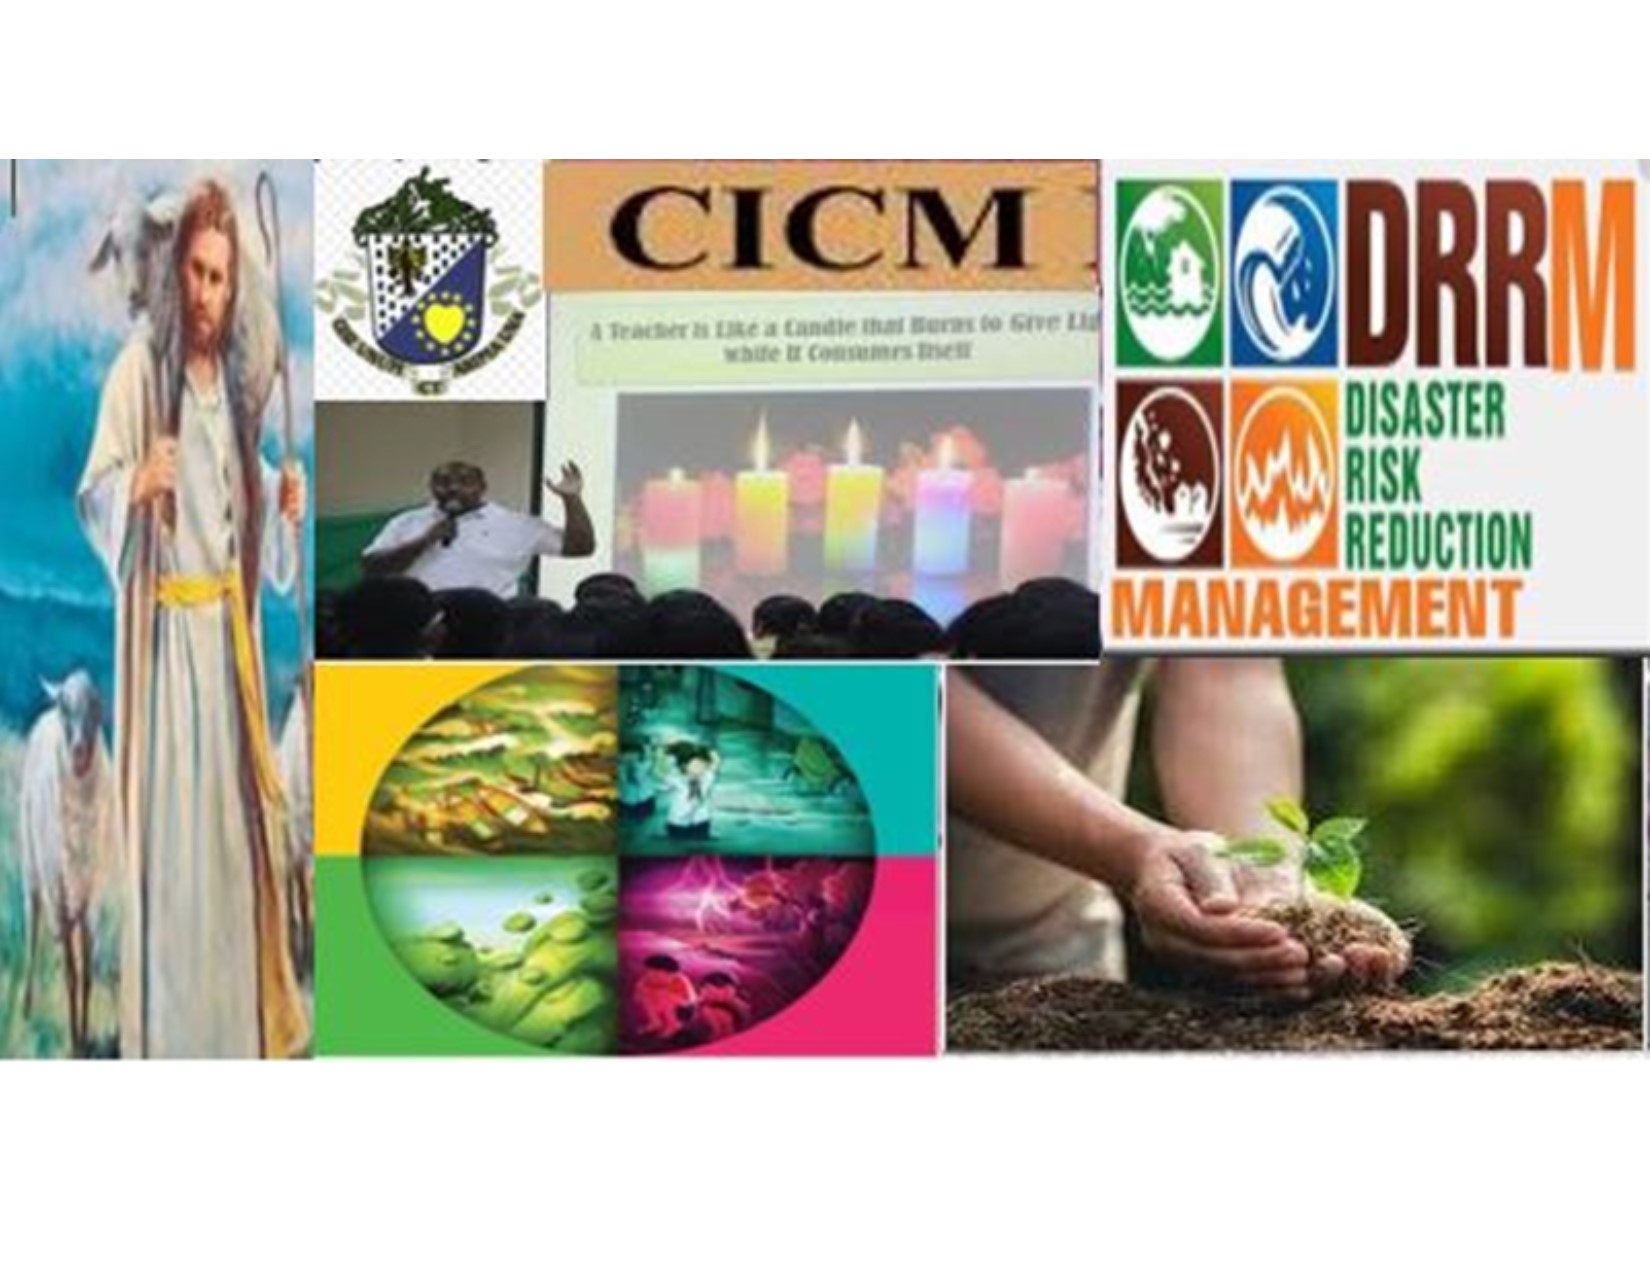 CFE 105b 4722 (3:30- 5:00 M) CICM in Action: Environmental Protection Management (Disaster Risk Reduction Management)